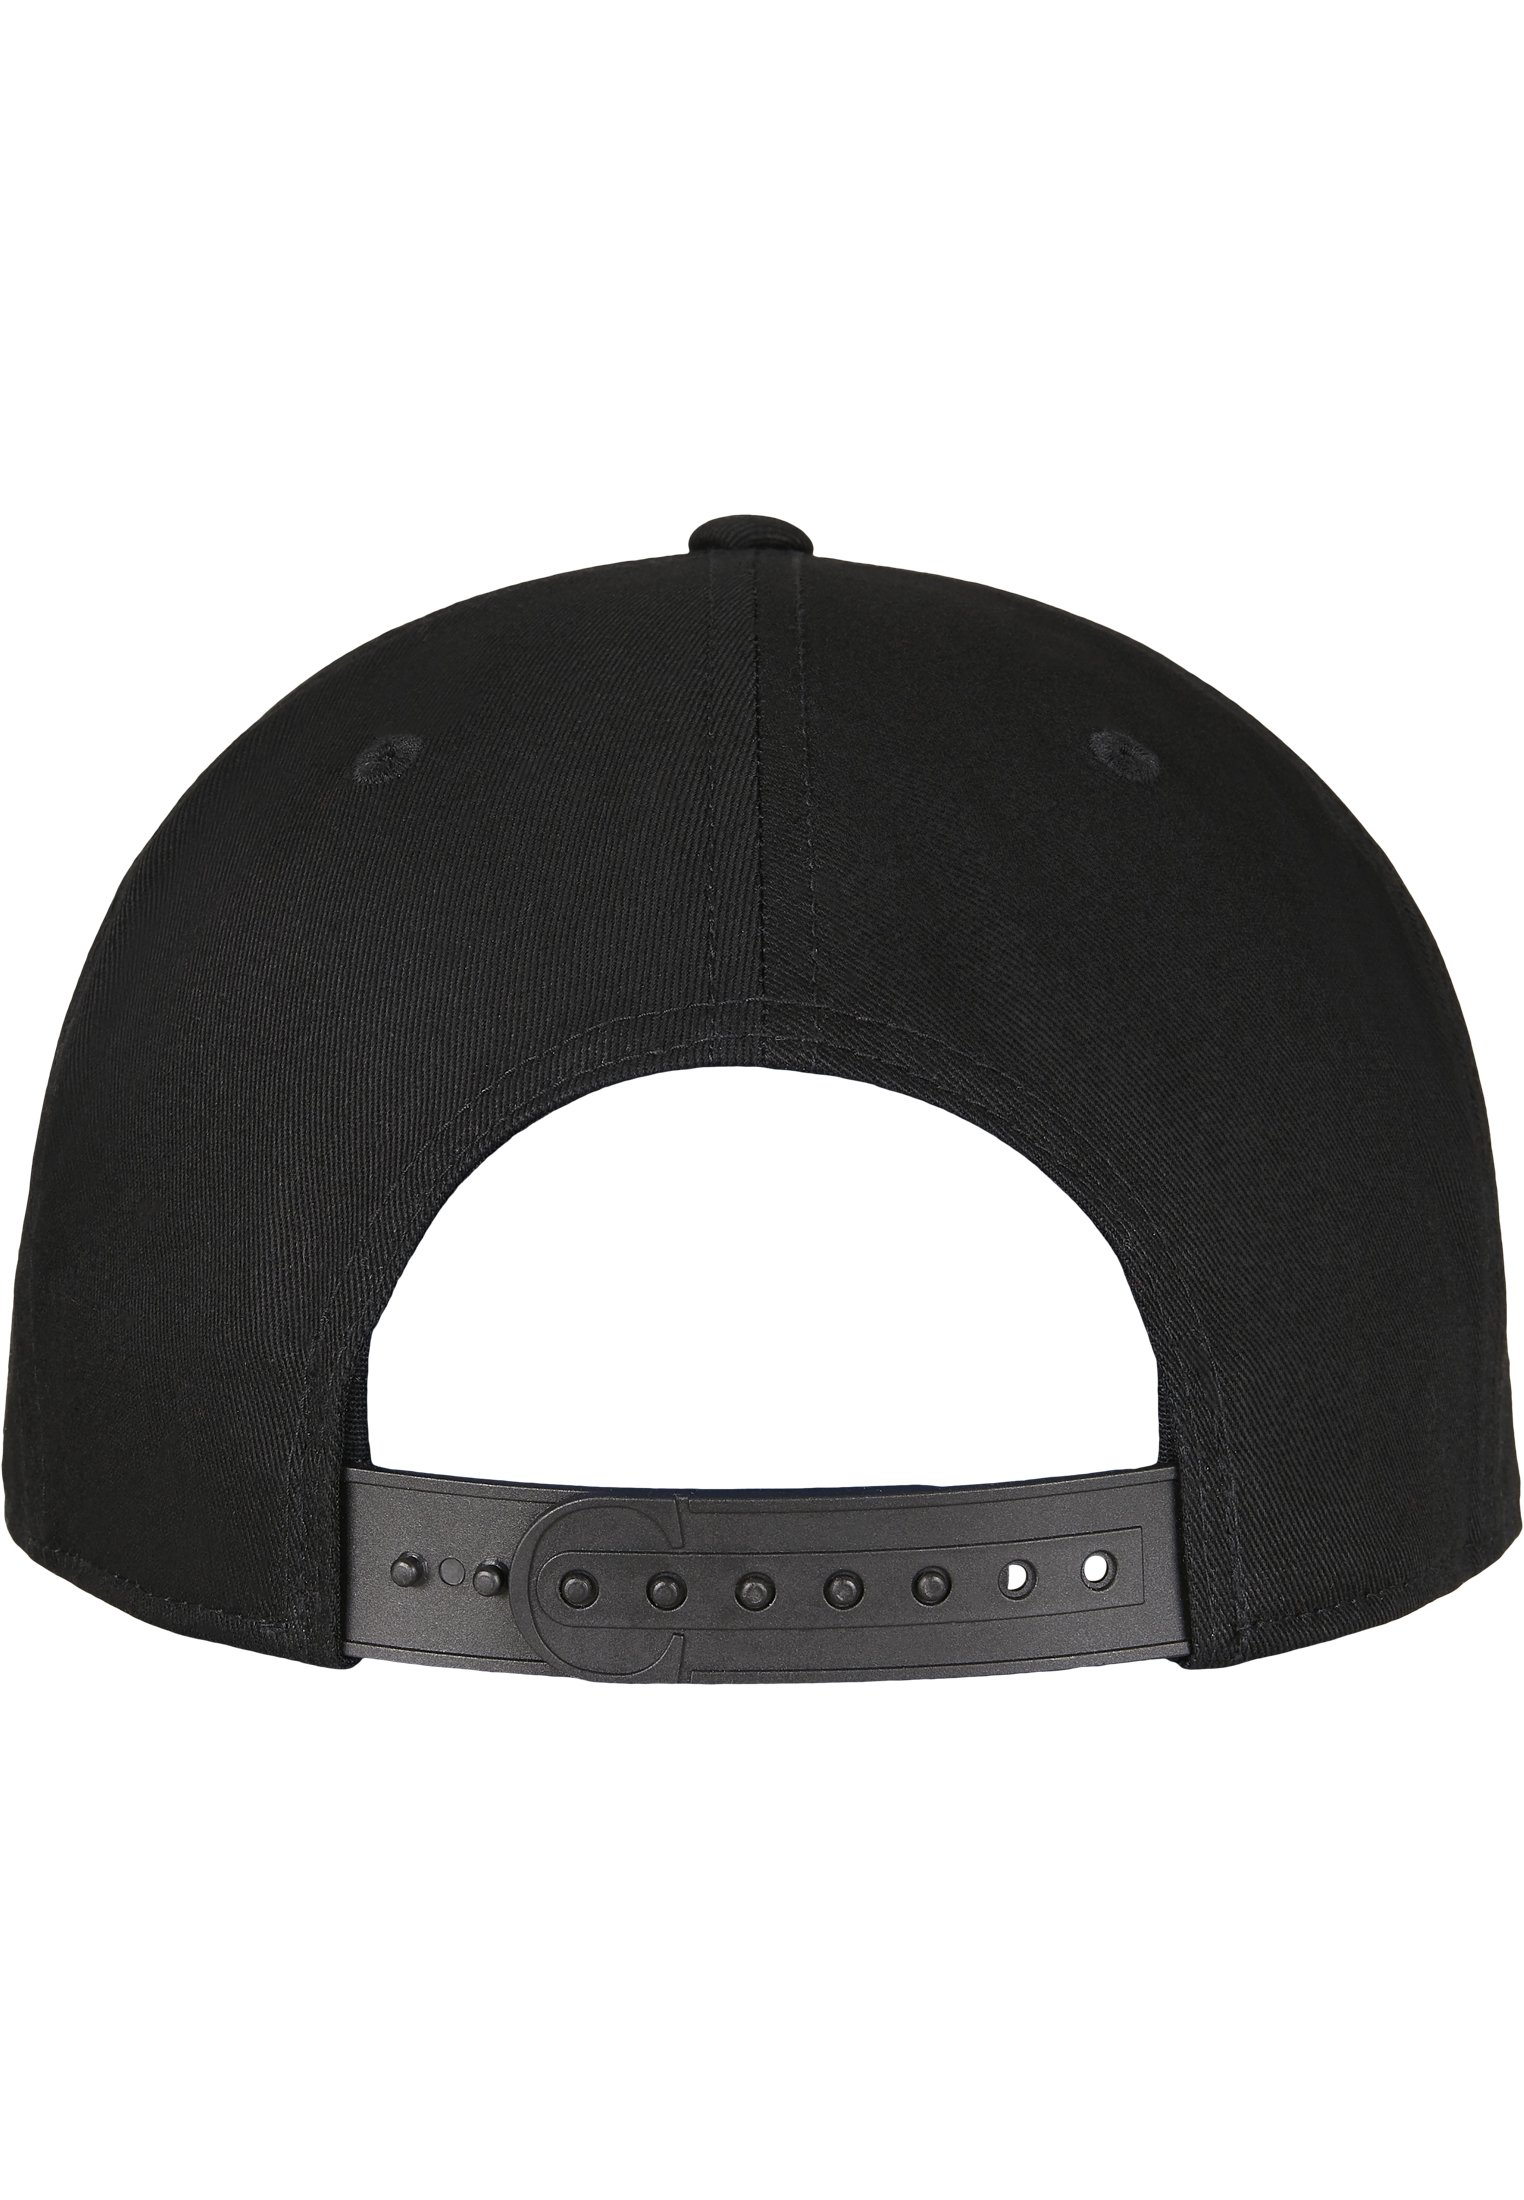 C&S WL Ride Or Fly Cap black/mc one size